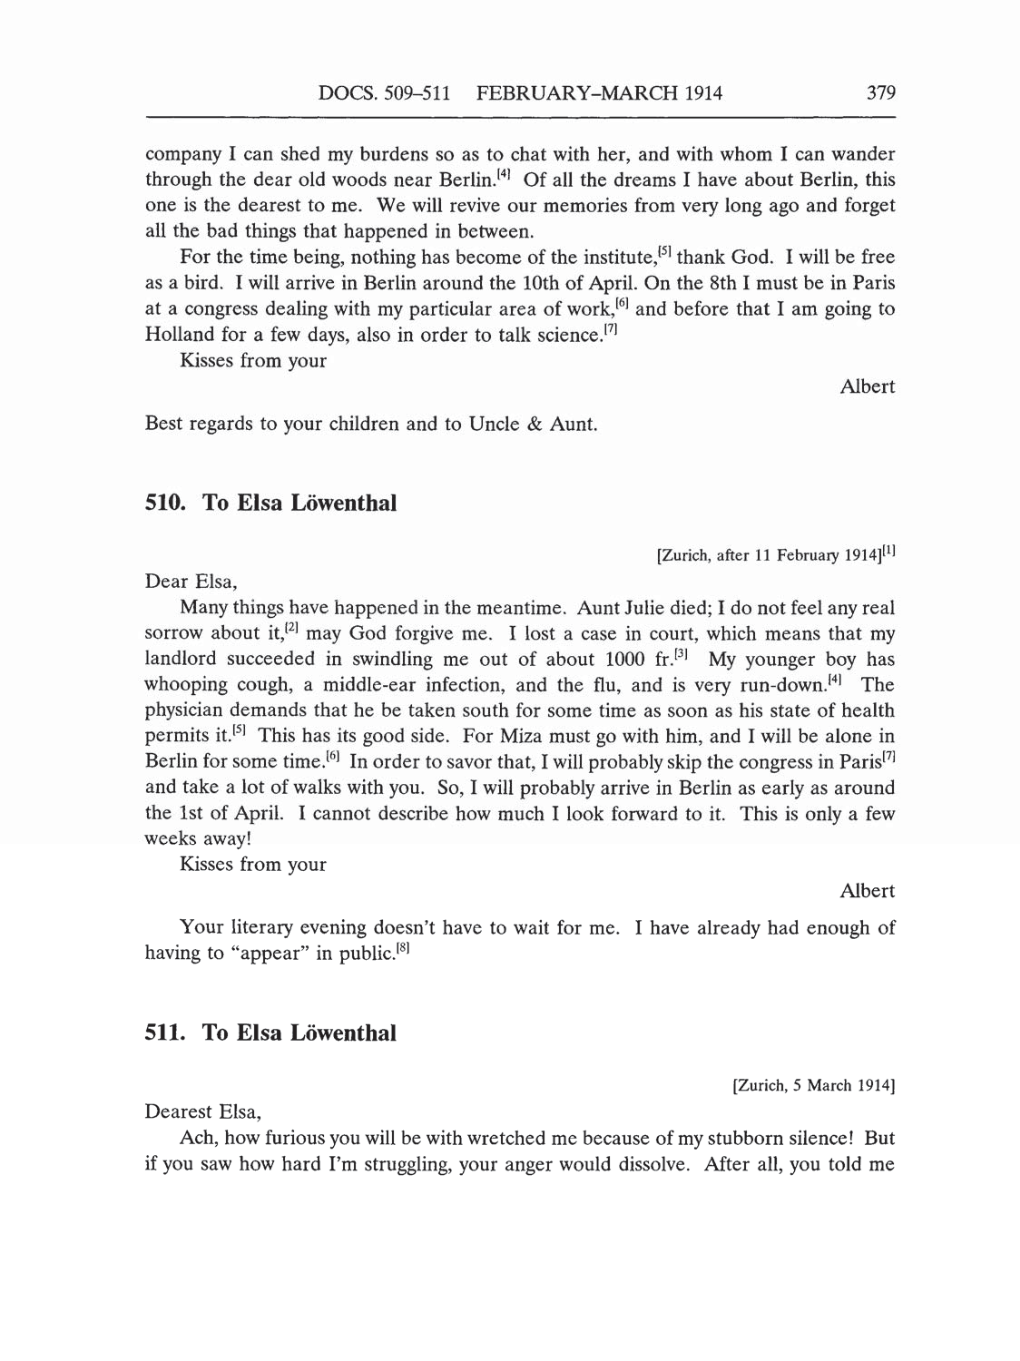 Volume 5: The Swiss Years: Correspondence, 1902-1914 (English translation supplement) page 379